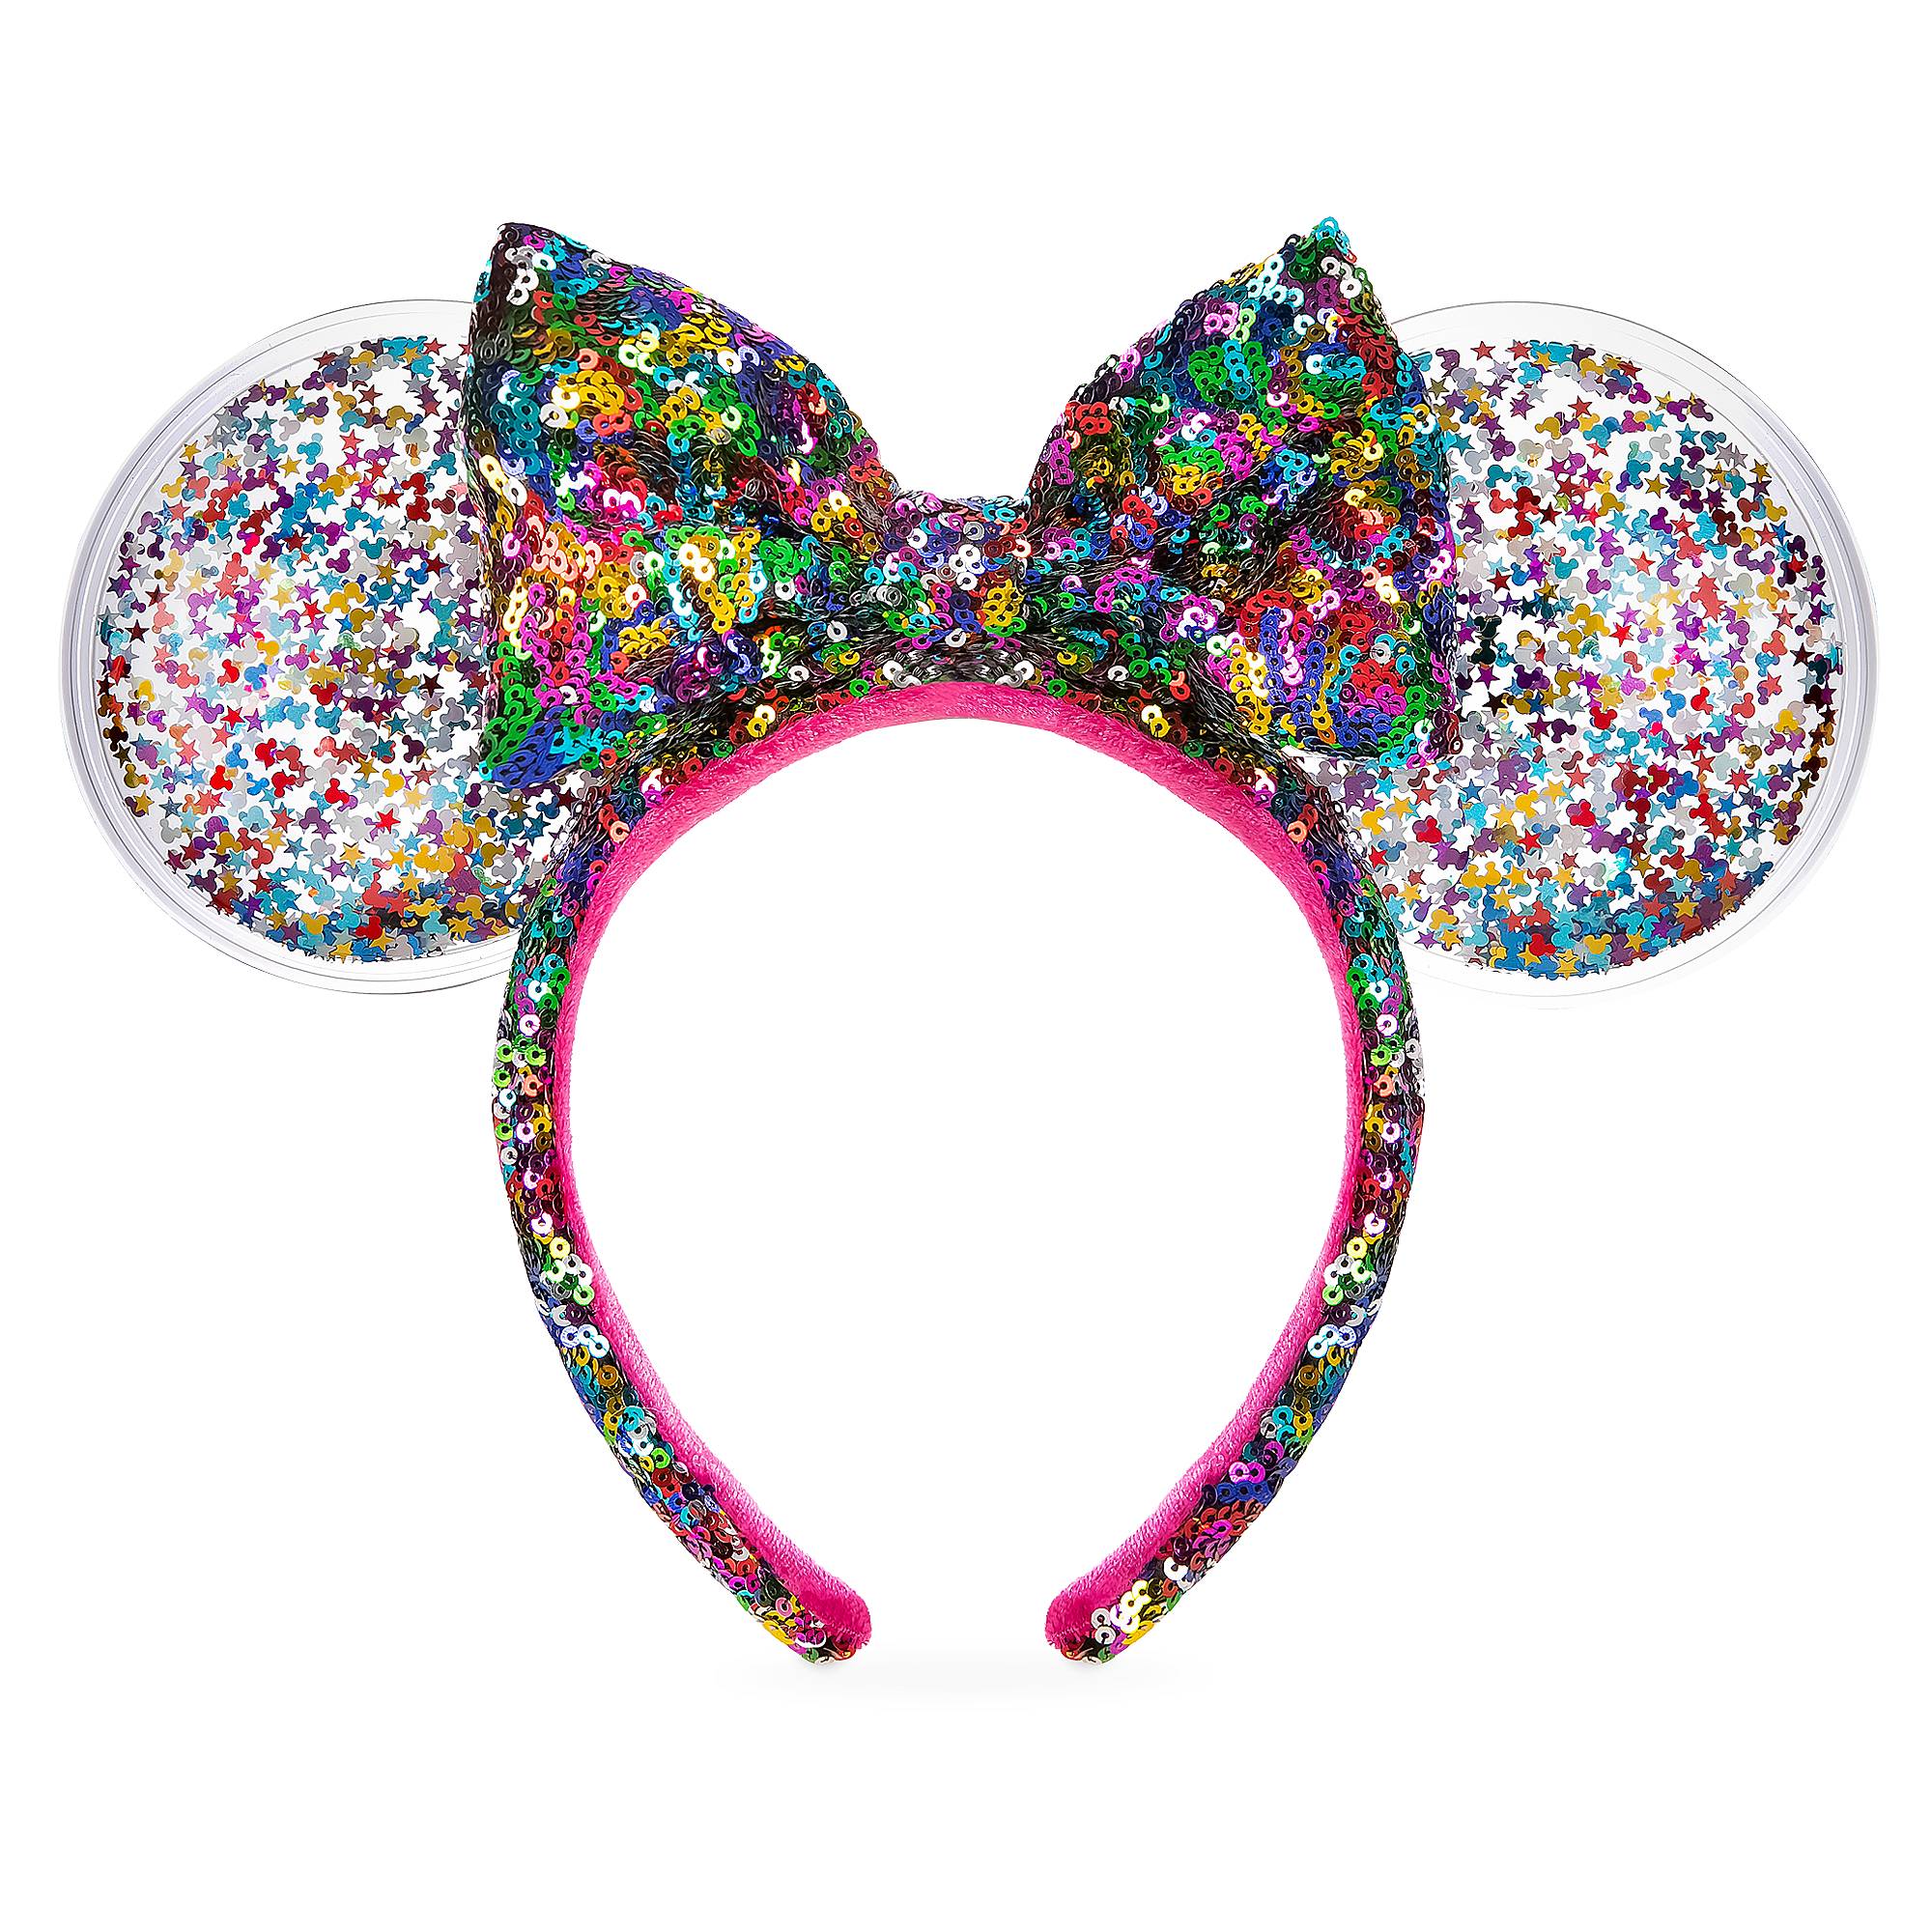 Minnie Mouse Sequined Ear Headband with Bow – Confetti image